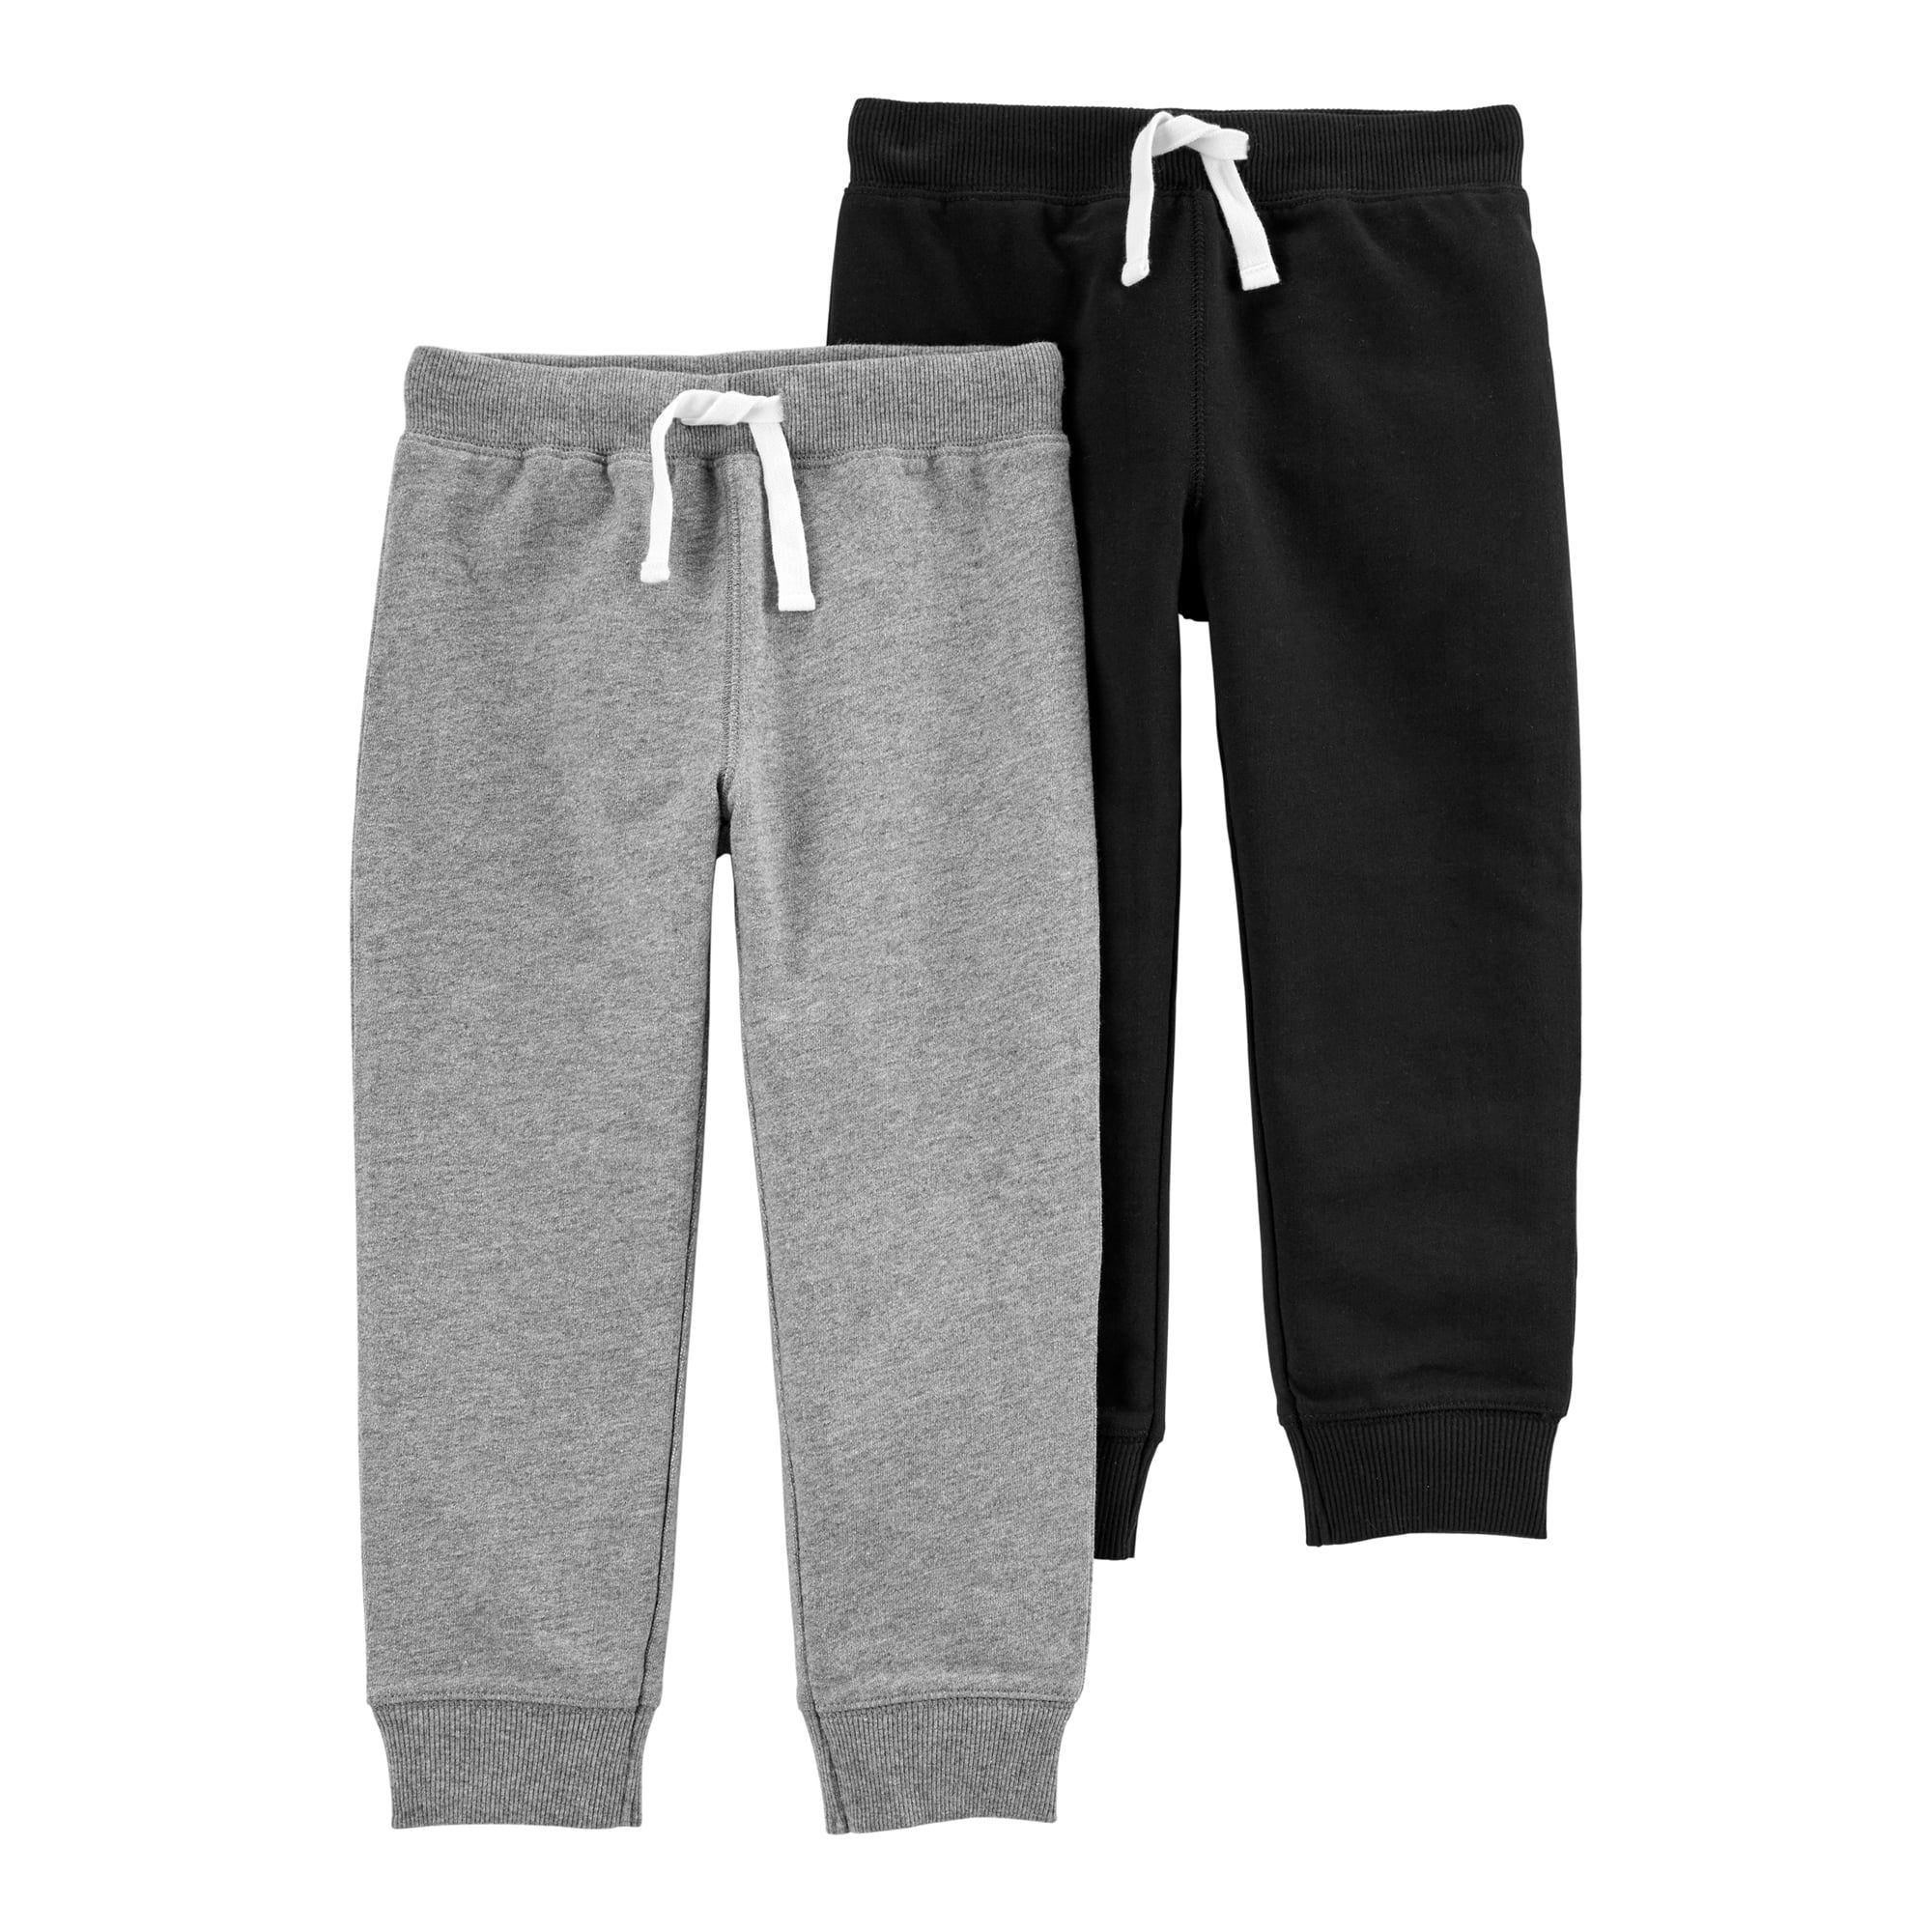 "Carter's Child of Mine Baby and Toddler Boy Jogger Sweatpants Multipack, 2-Pack, Sizes 12M-5T" | Walmart (US)